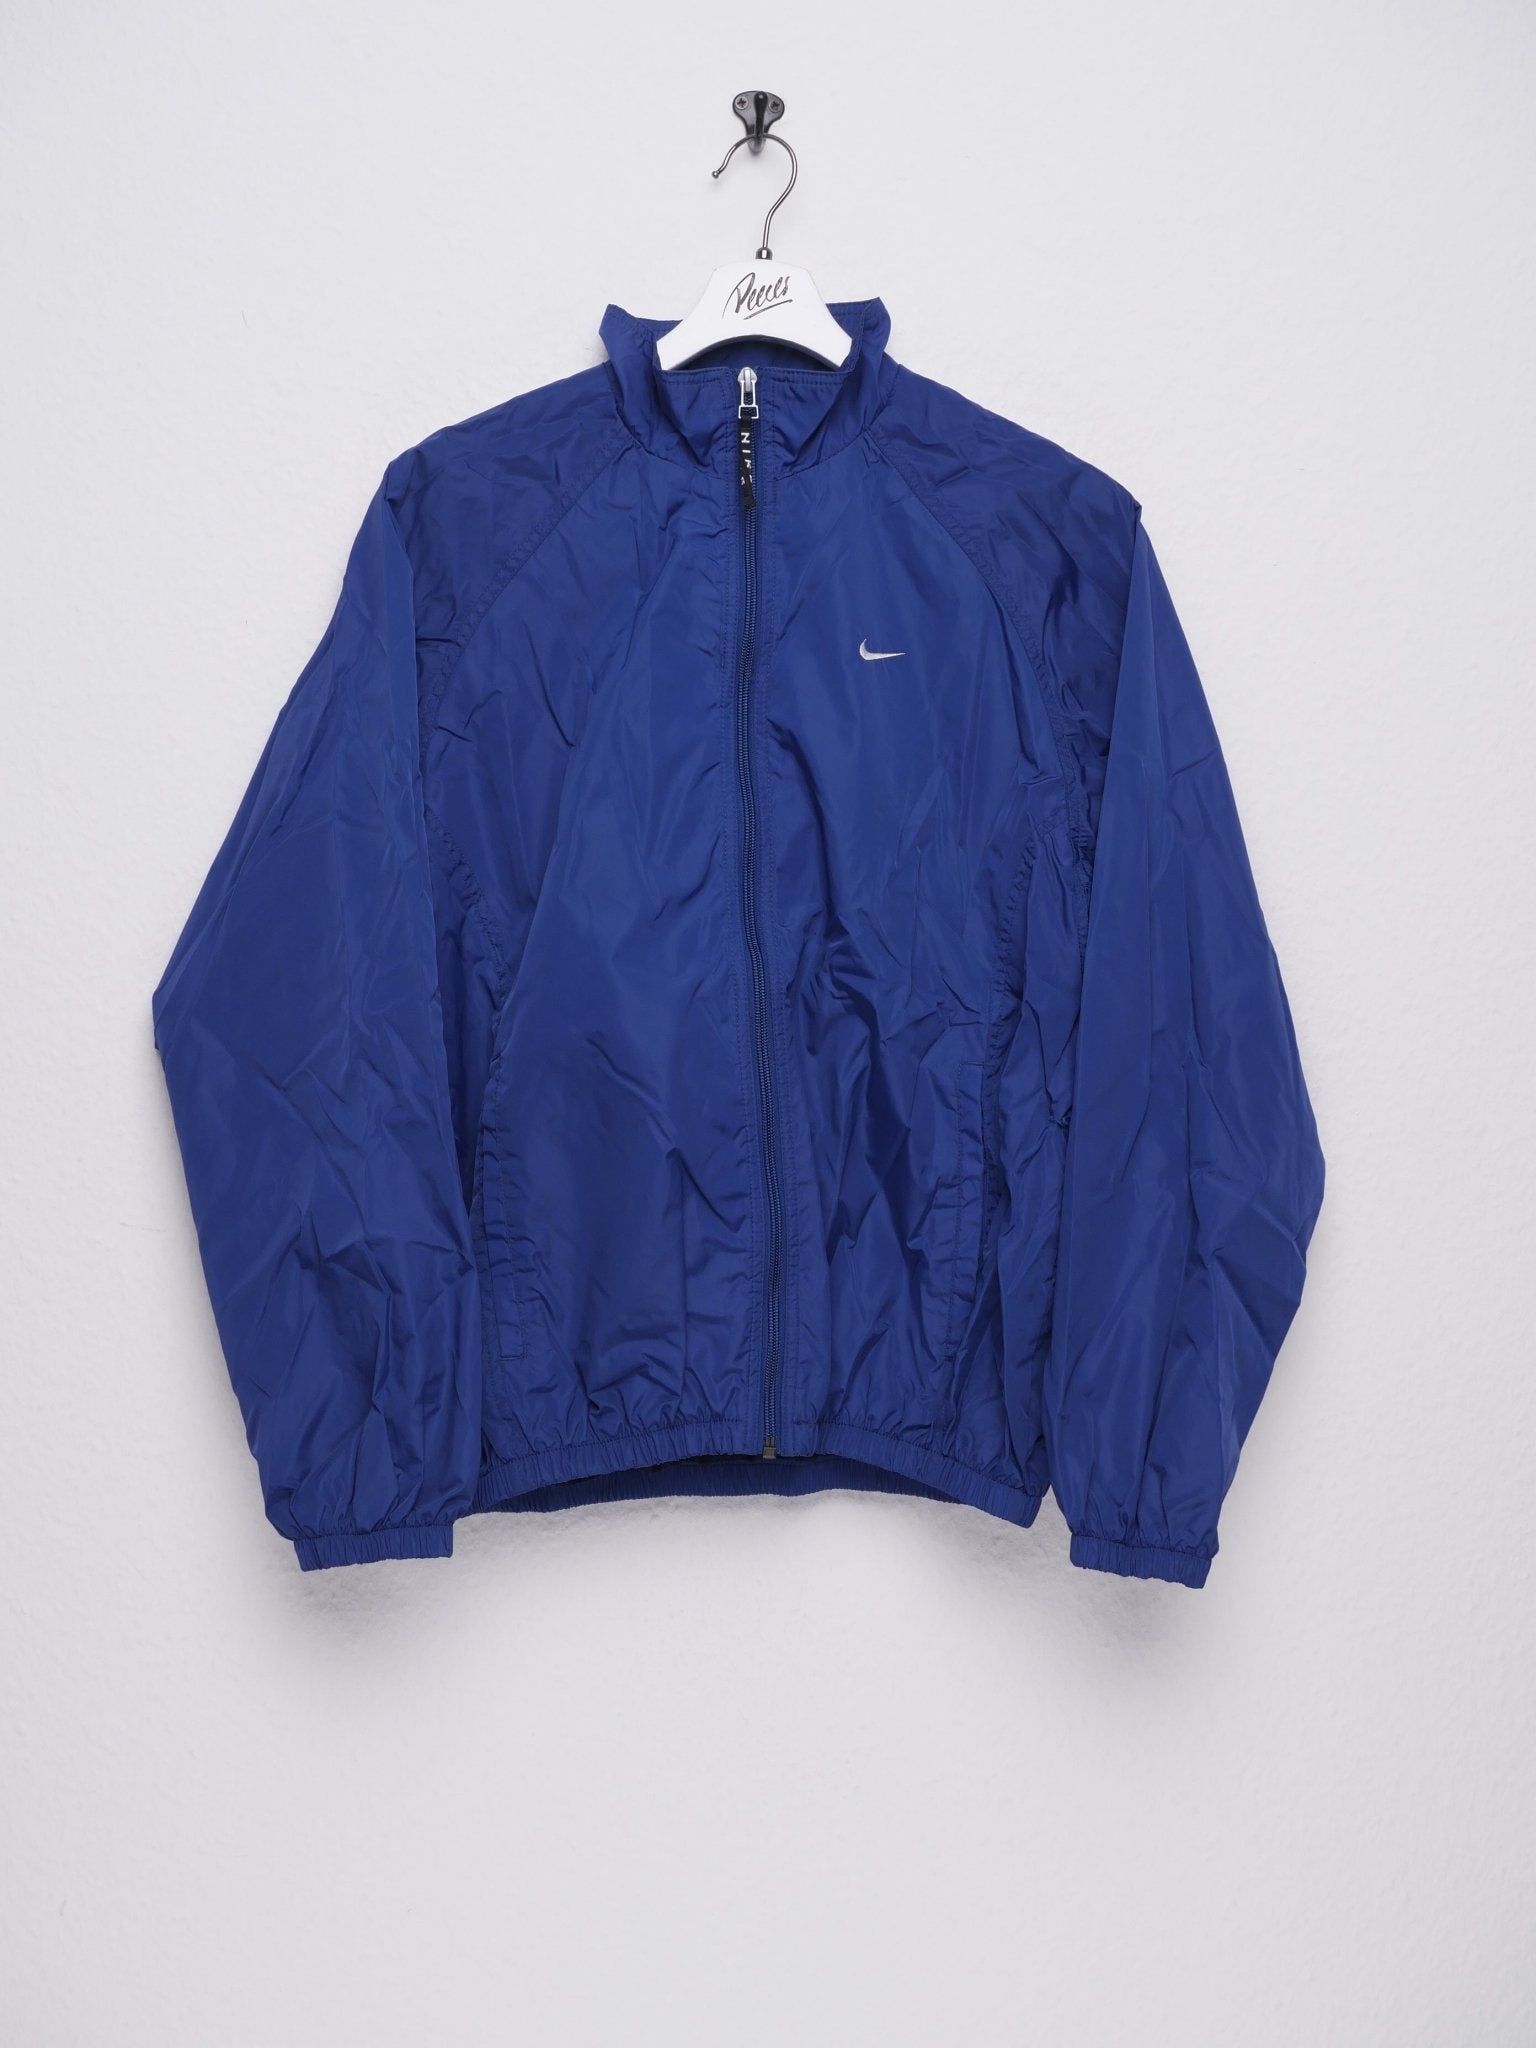 nike Red Tag embroidered Swoosh navy Track Jacket - Peeces